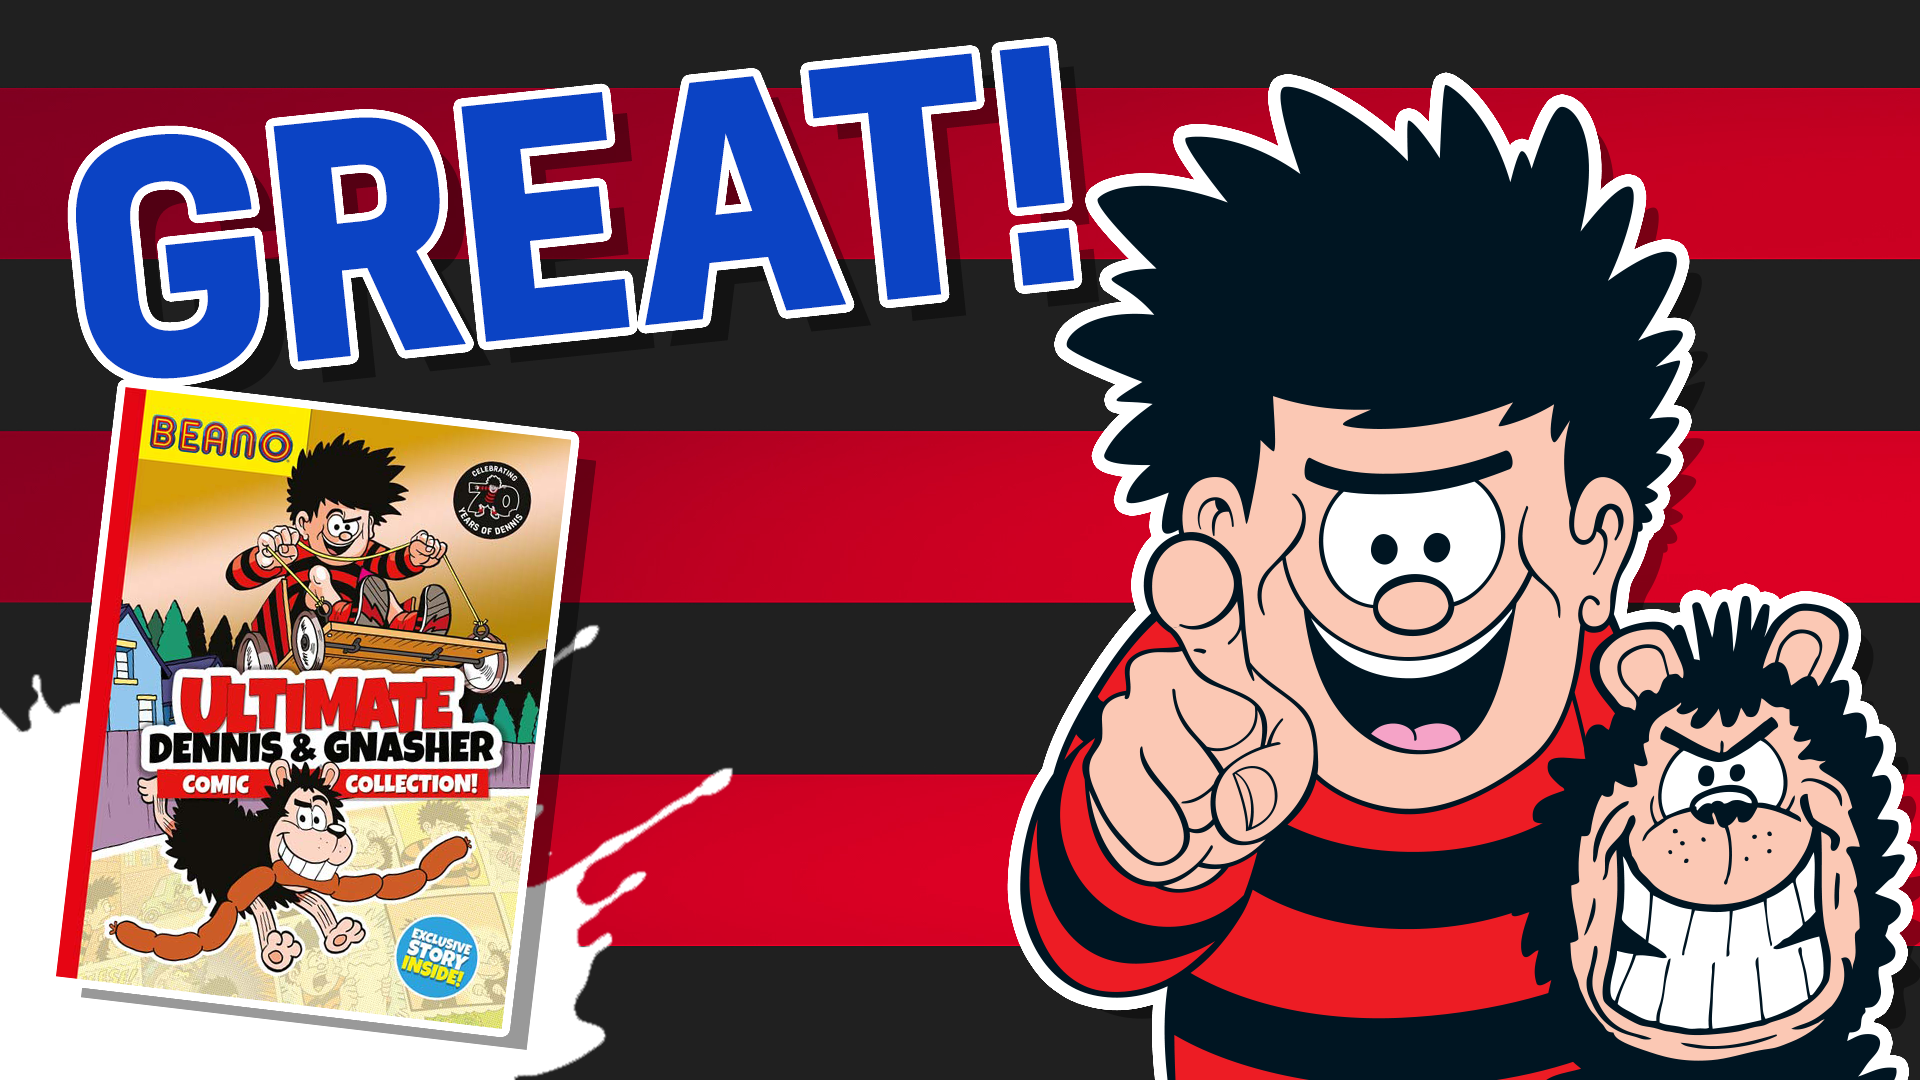 Dennis and Gnasher quiz result: Great